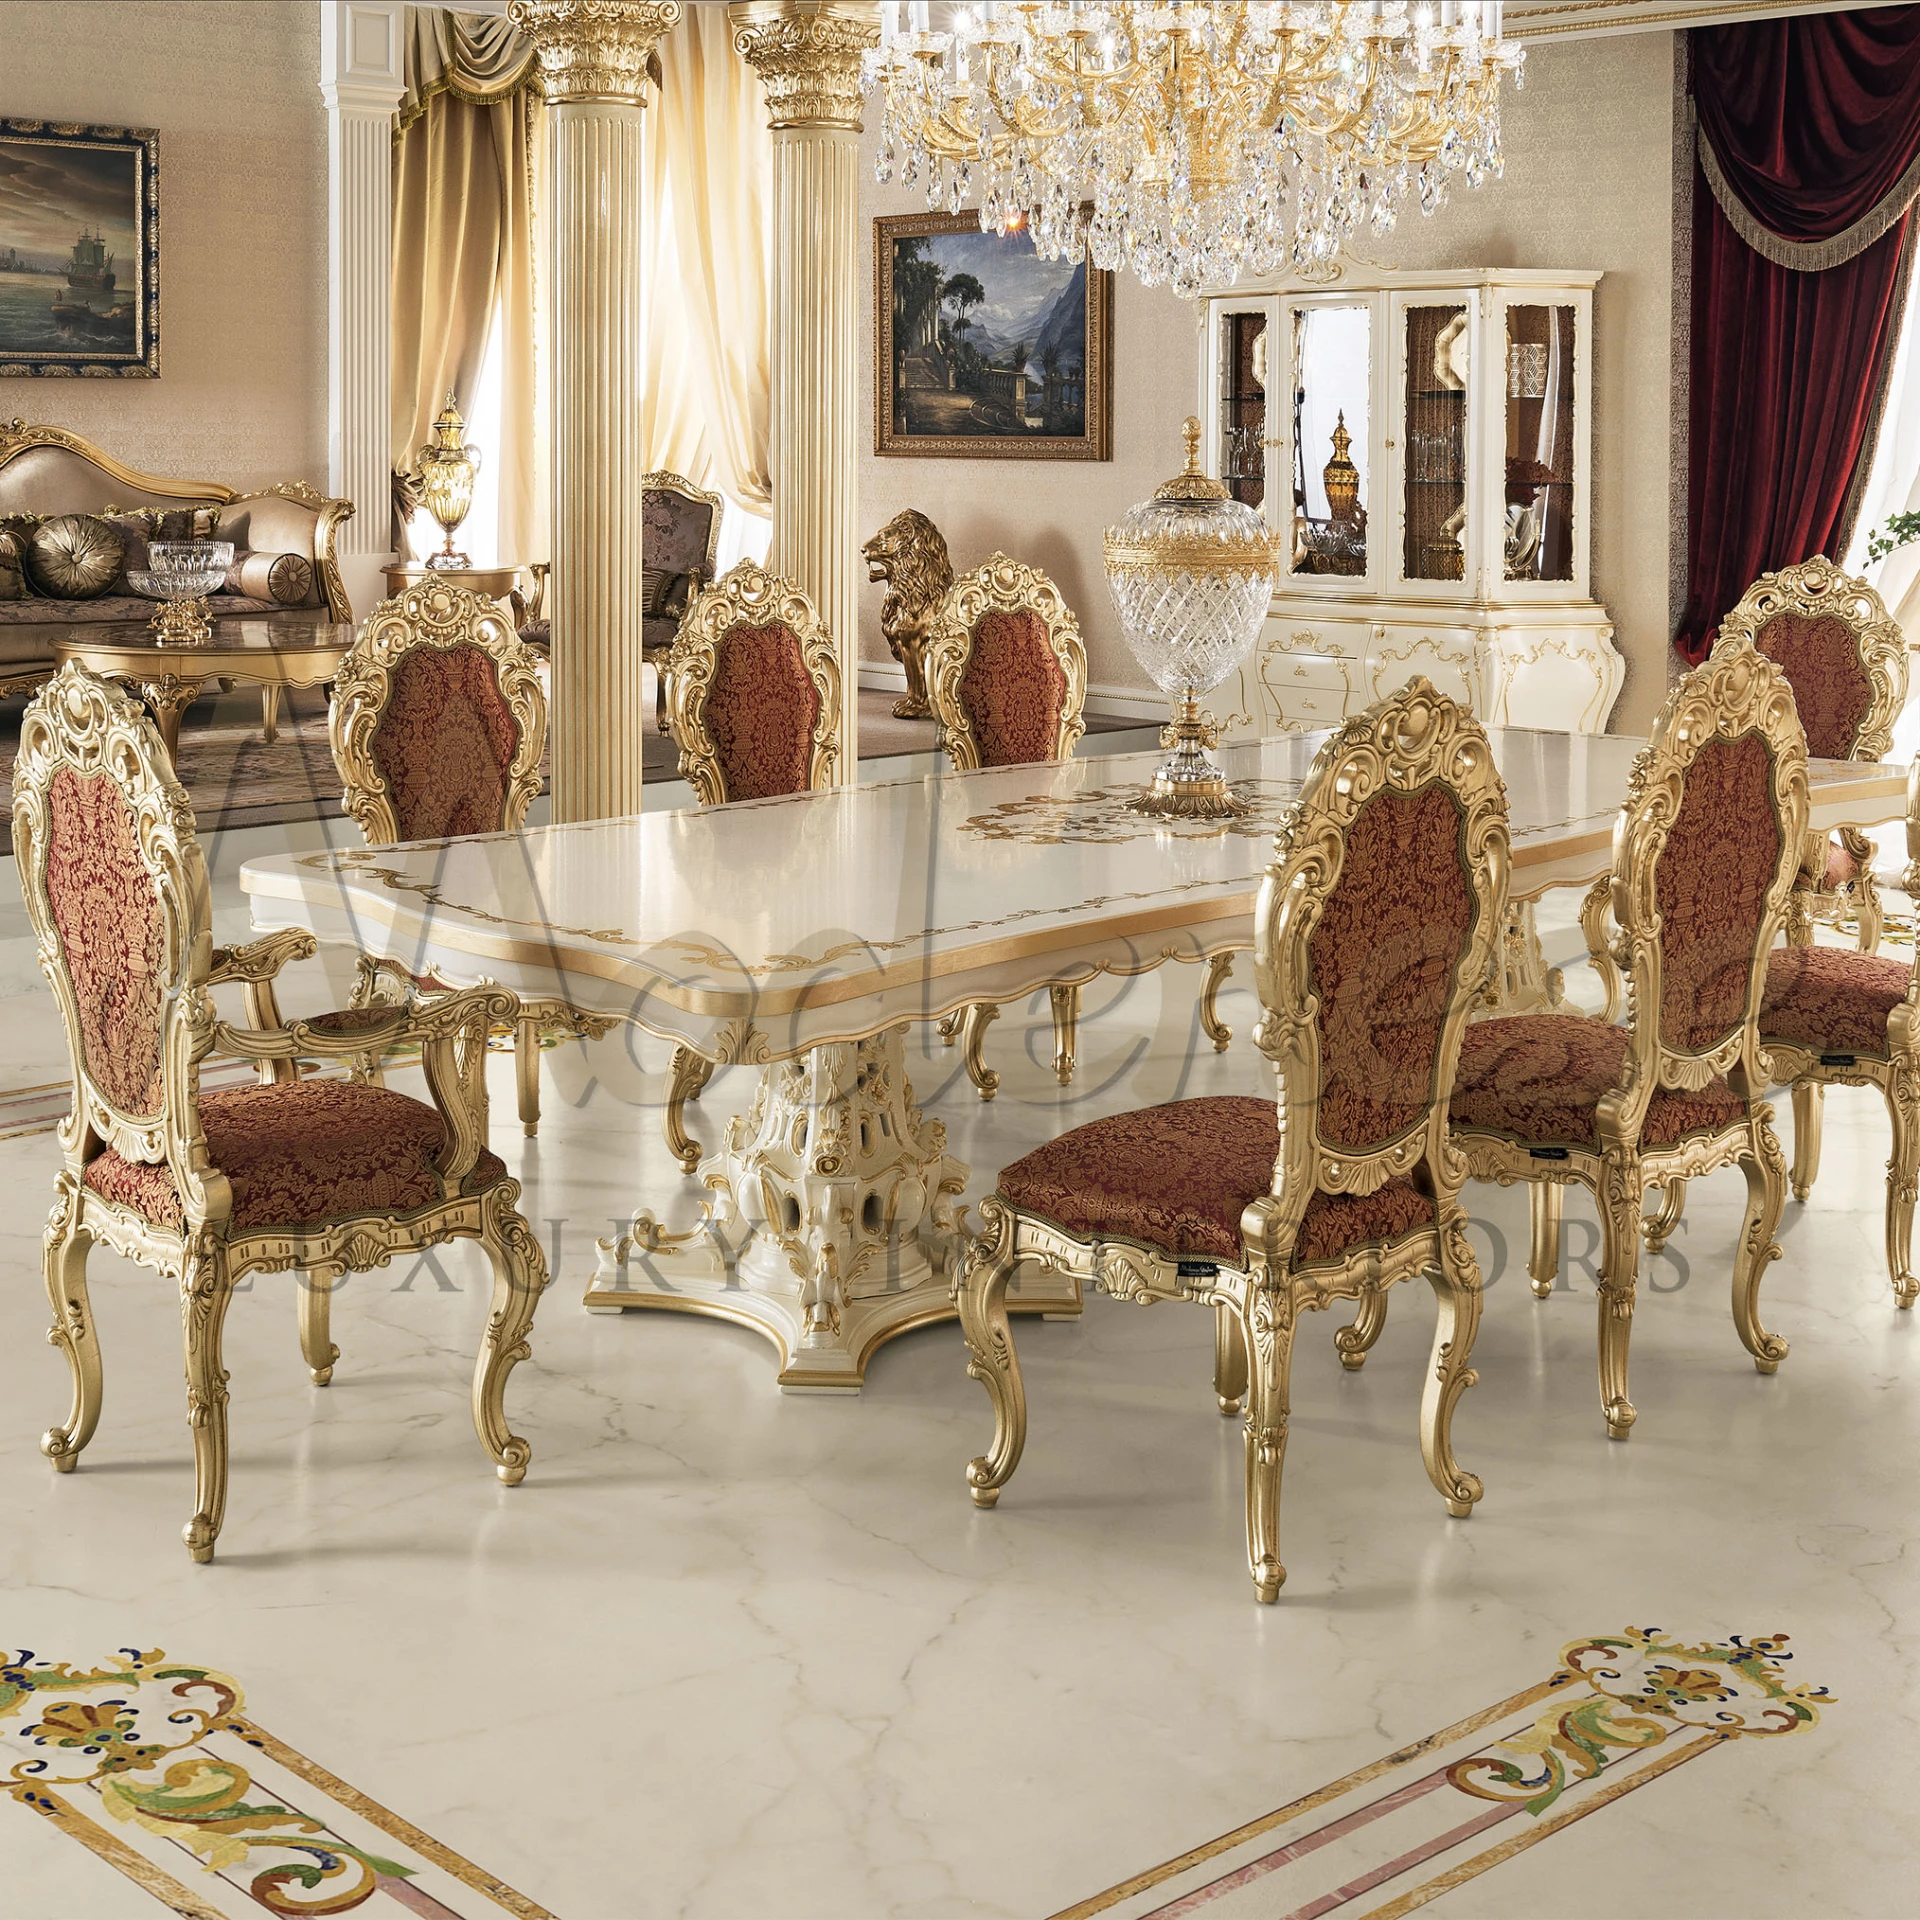 Transform your mansion into a palace with Modenese Interior's exquisite baroque dining. Hand-carved, gold-leaf embellished, patterned upholstery for regal comfort.